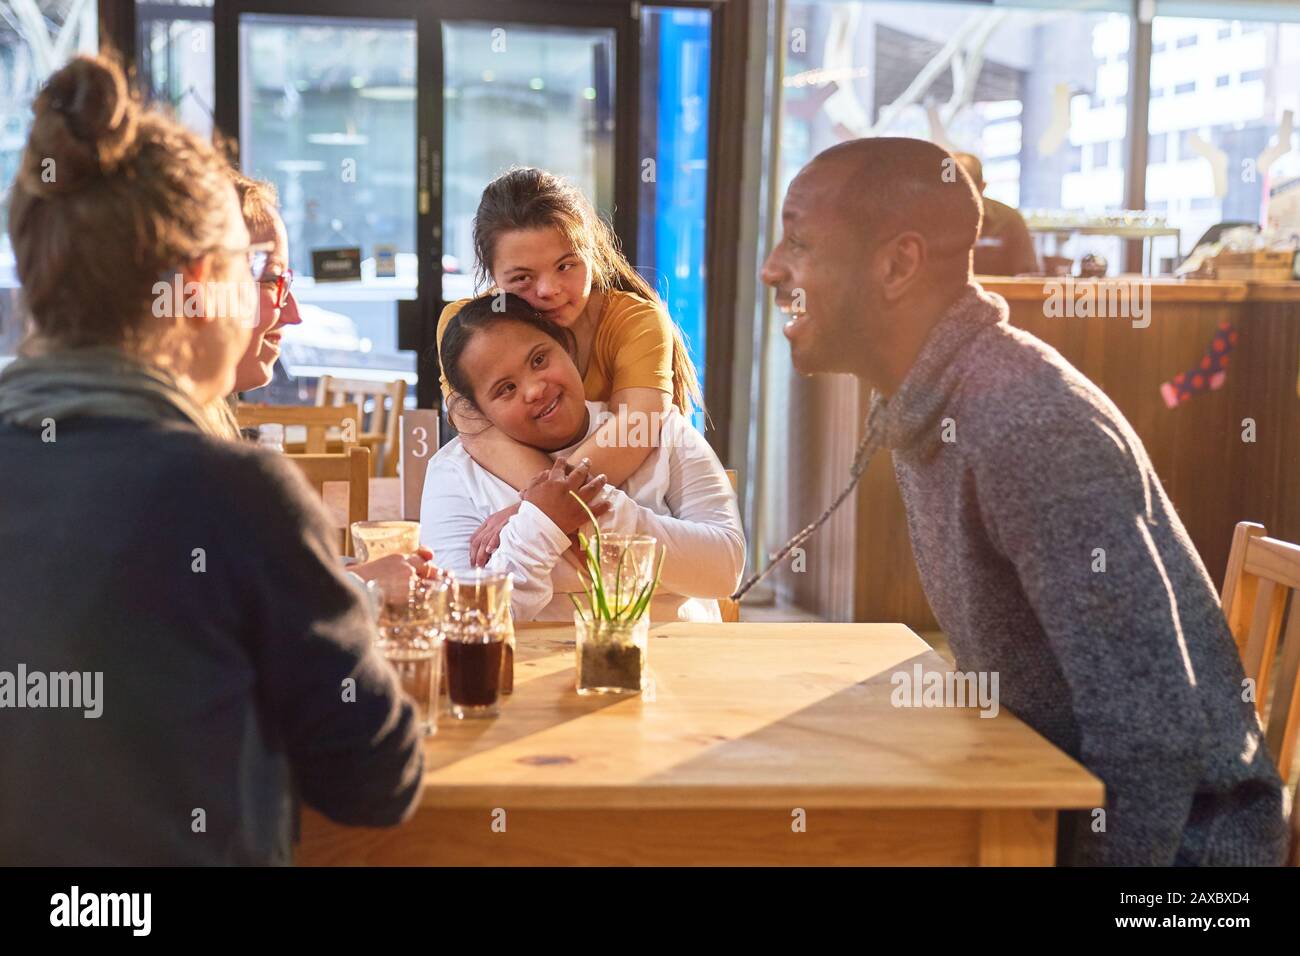 Affectionate young women with Down Syndrome in cafe with friends Stock Photo